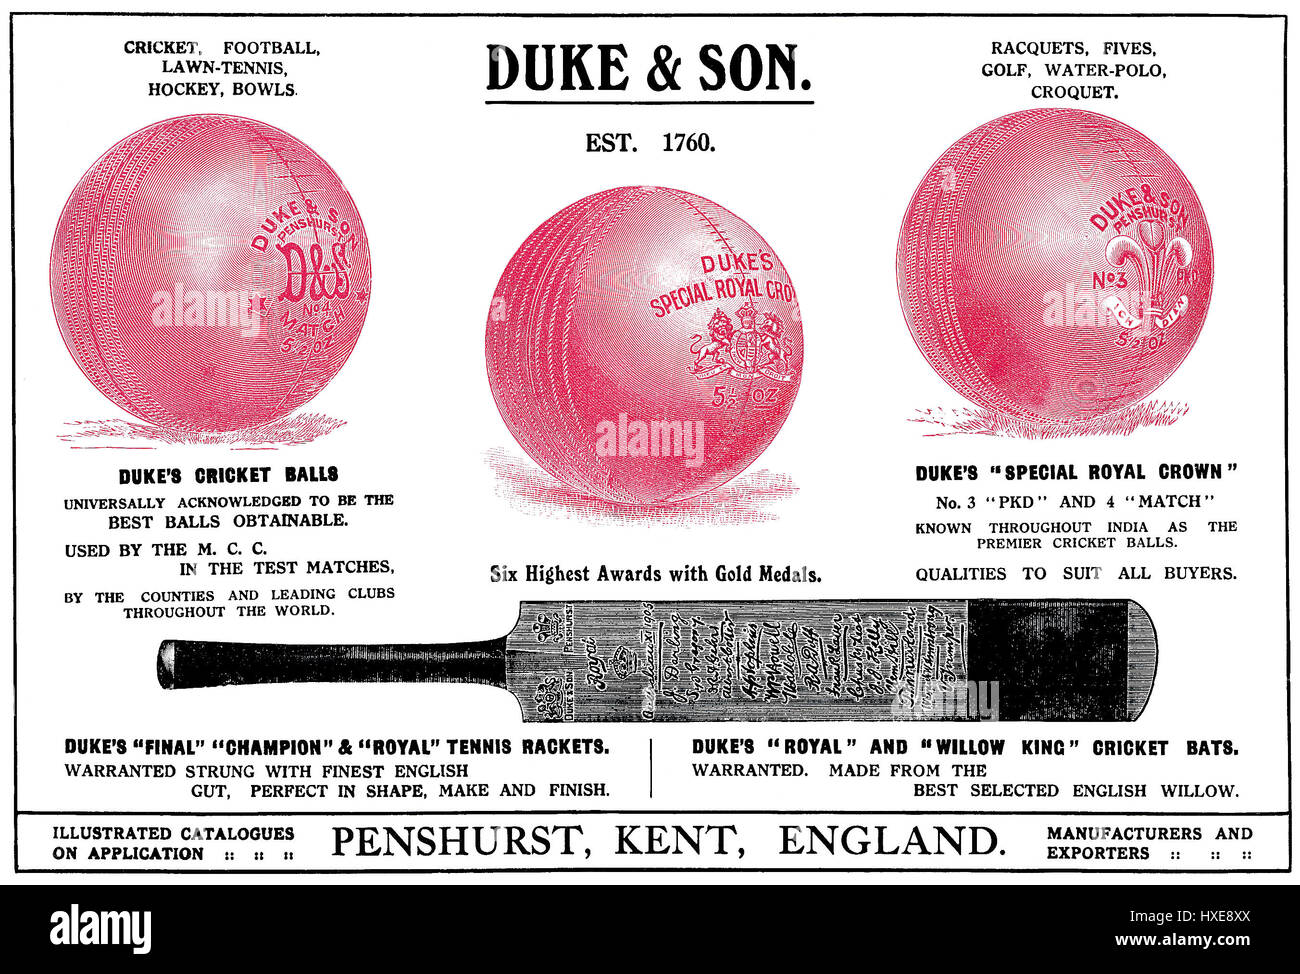 1922 Indian advertisement for Duke & Son sports equipment. Published in the Times Of India Annual, 1922. Stock Photo